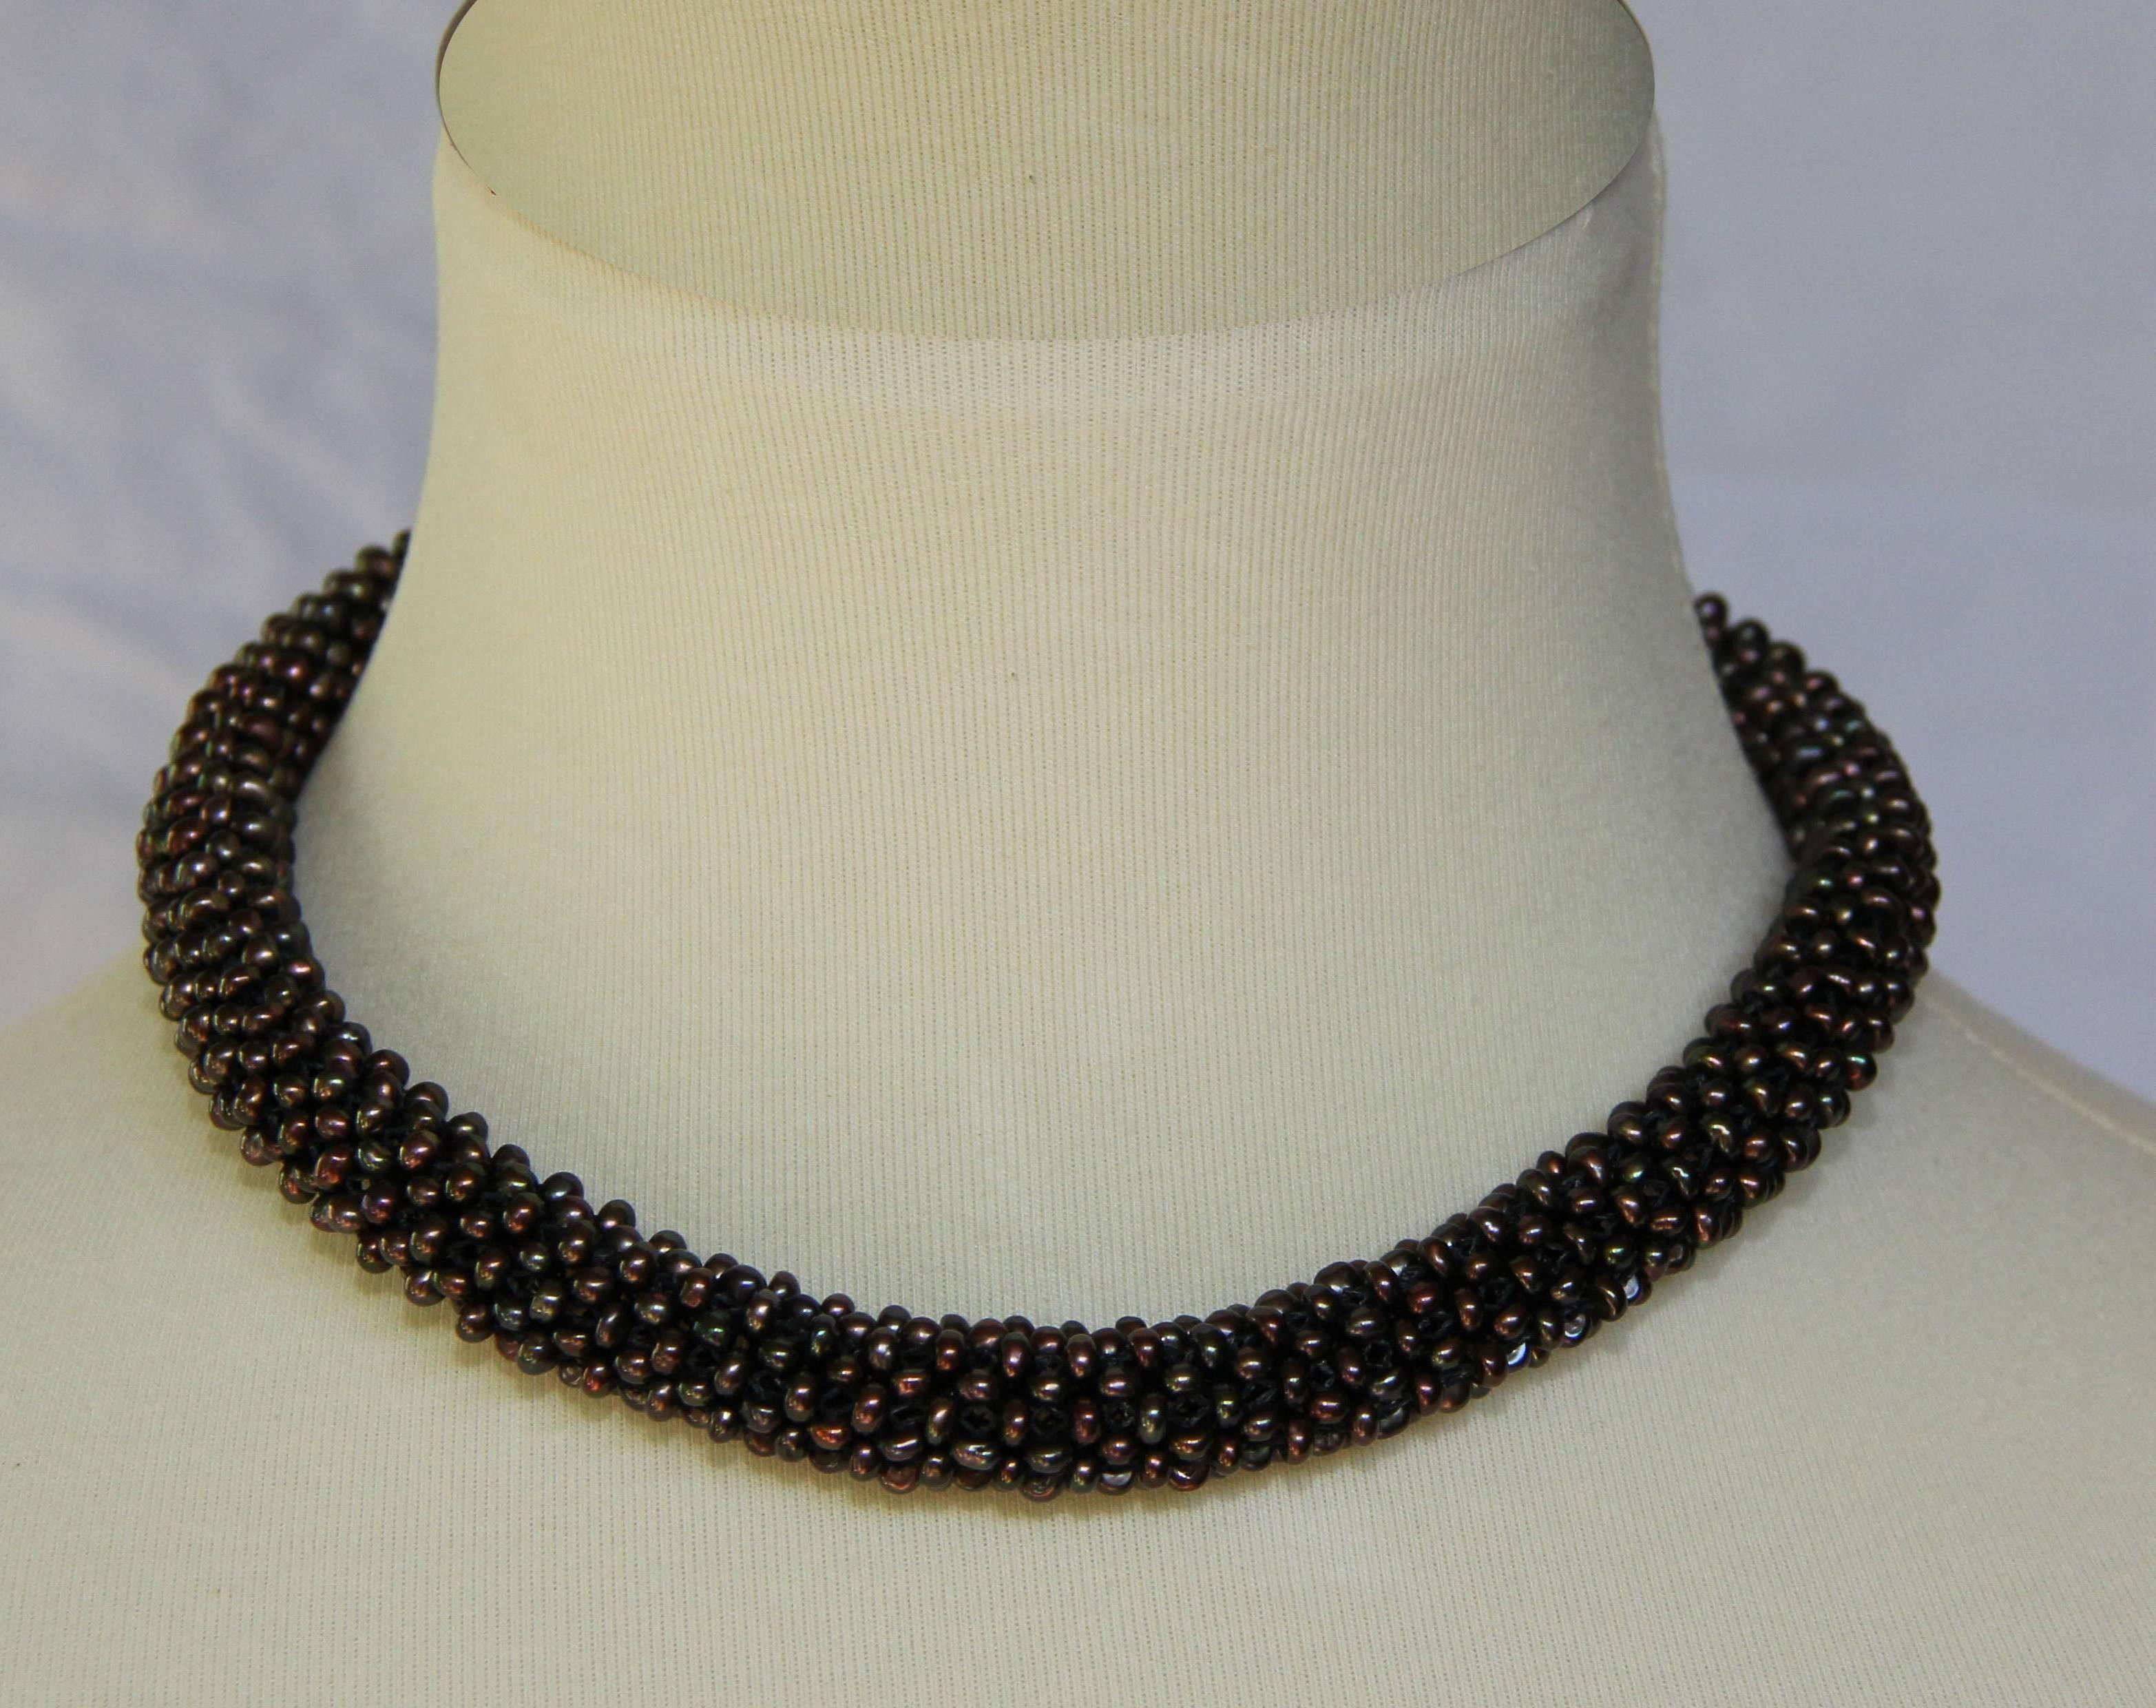 Black color pearl beads are woven together to create a dimensional rope like necklace. They form a thick tubular rope of approximately 1/3 of an inch in diameter. This unique, modern and one-of-a-kind necklace can be worn day or night, casual or